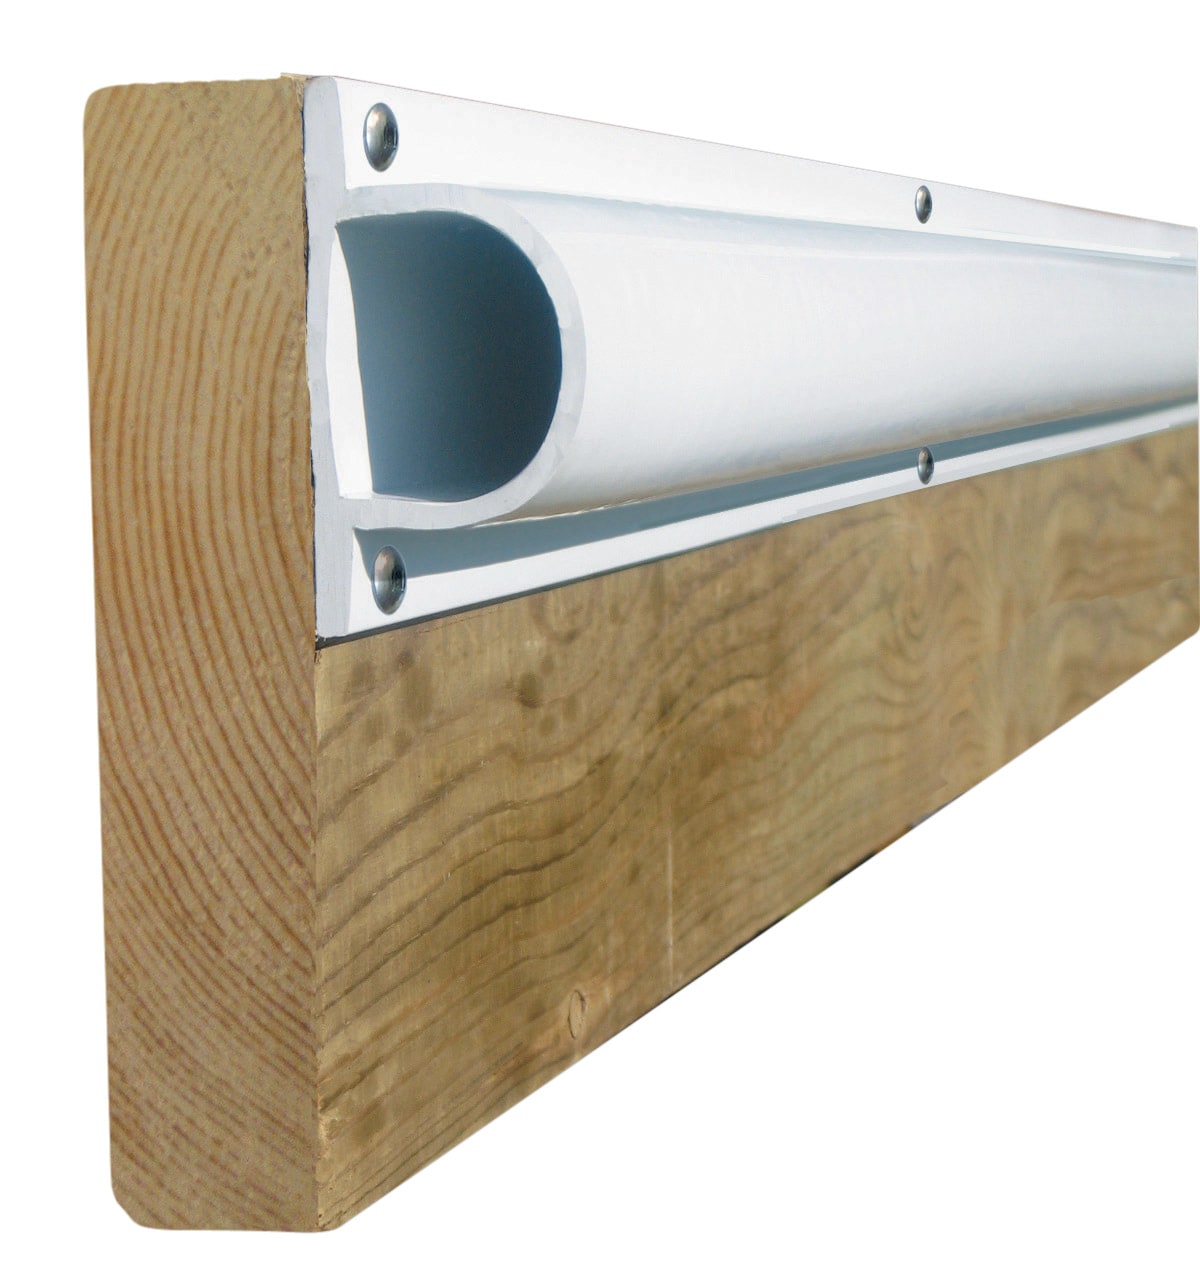 Dock Edge + Heavy D Dock Bumper Profile - White PVC - 3 x 8 foot lengths,  24 feet total in the Marine Hardware department at